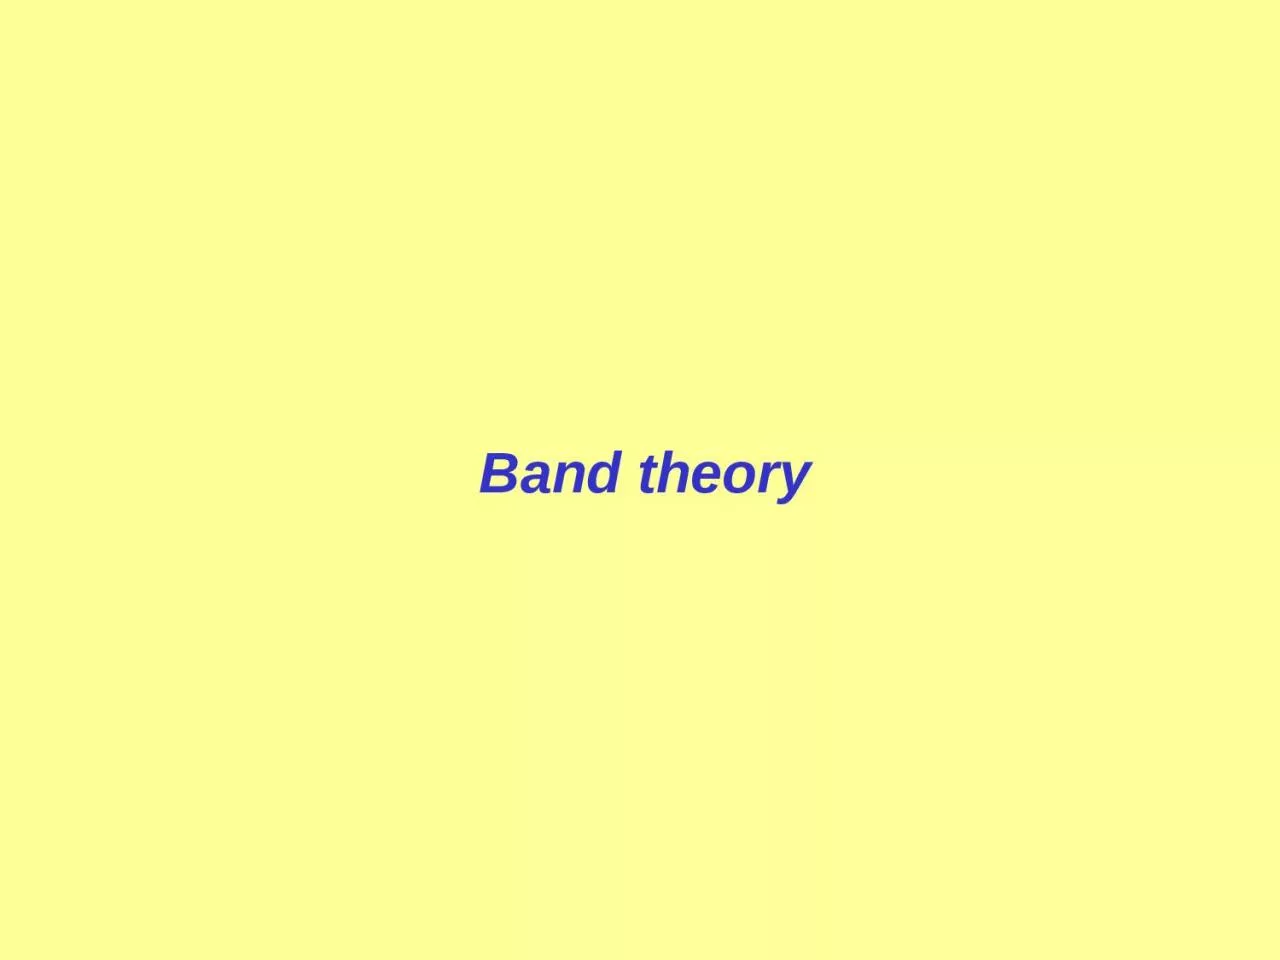 Band theory Materials can be divided into three broad categories according to their electrical